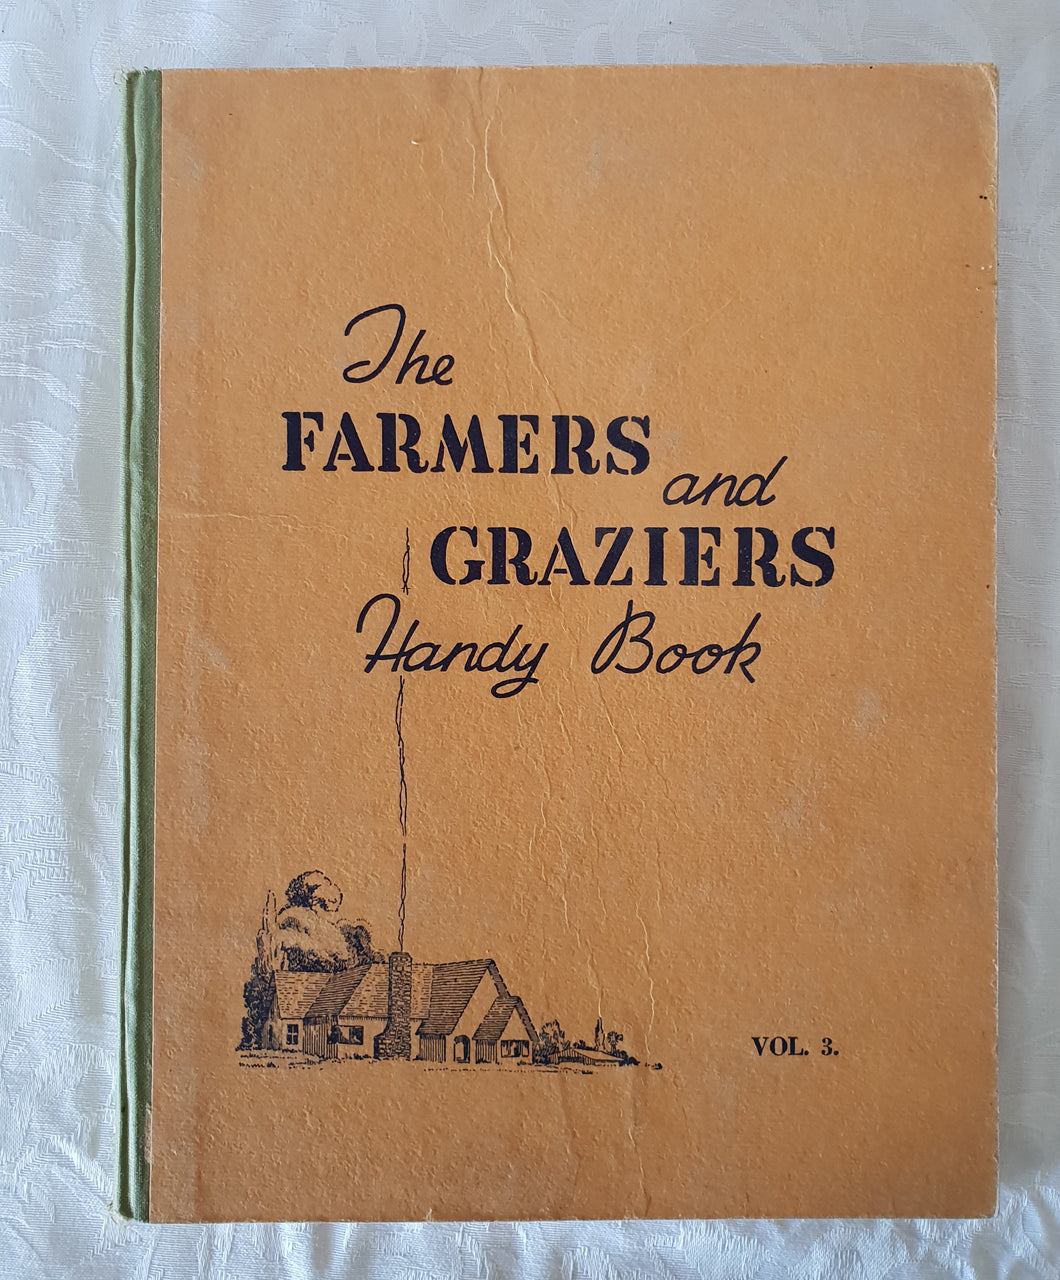 The Farmers and Graziers Handy Book Volume 3 Compiled by J. V. Bartlett